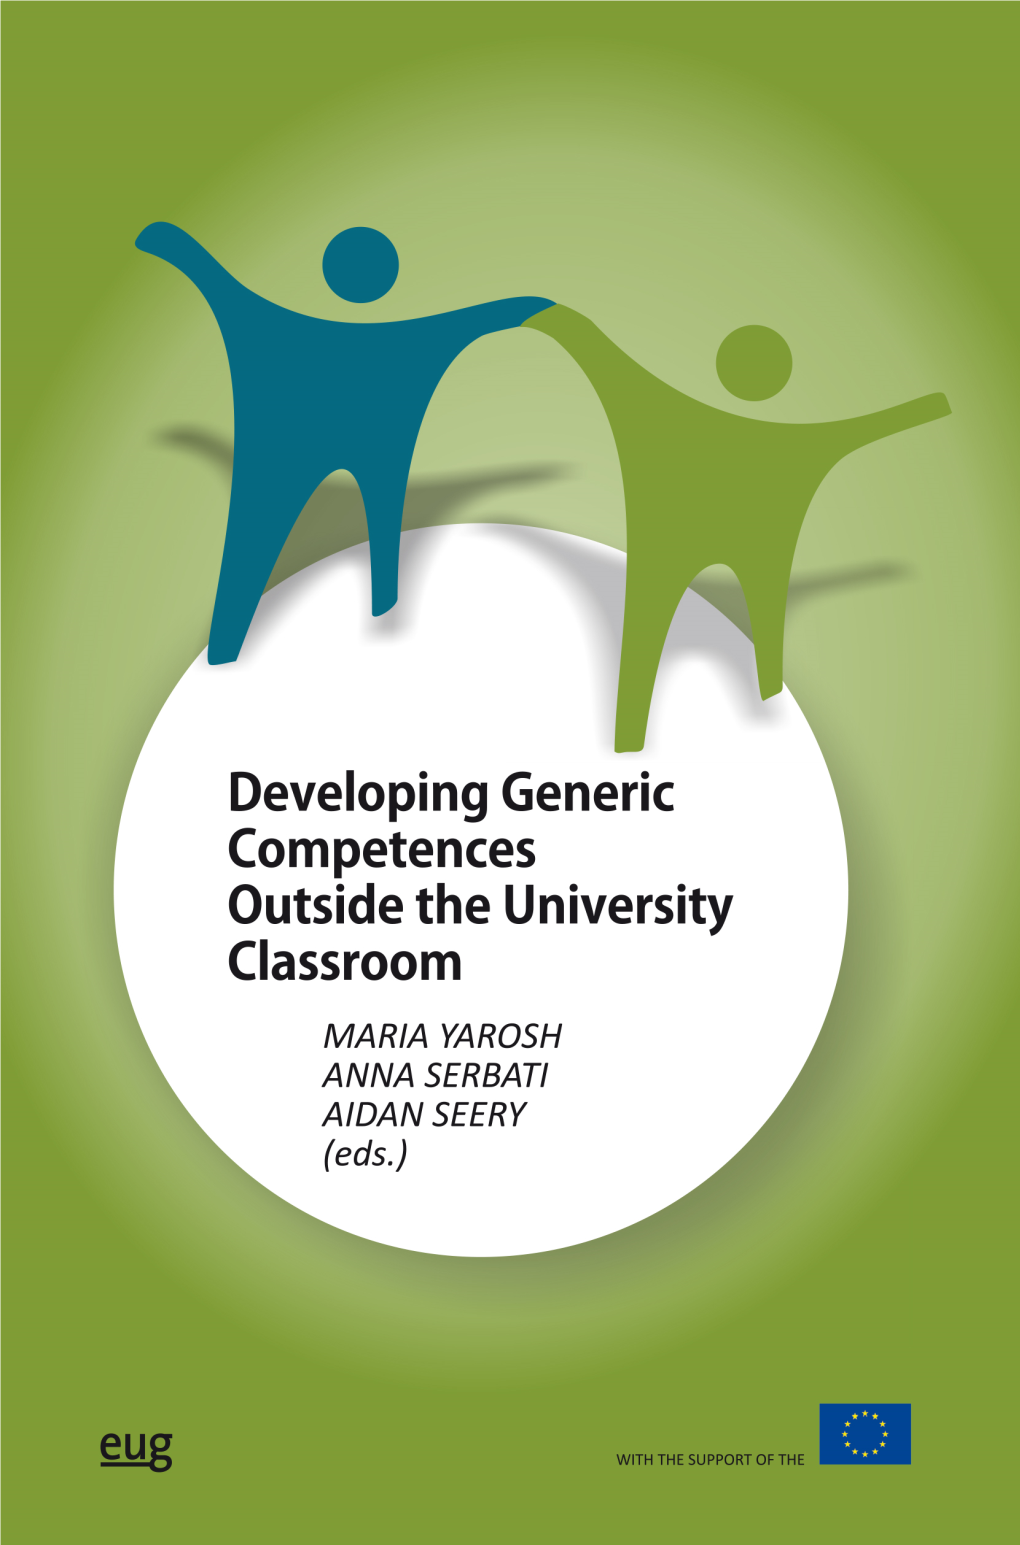 Developing Generic Competences Outside the University Classroom